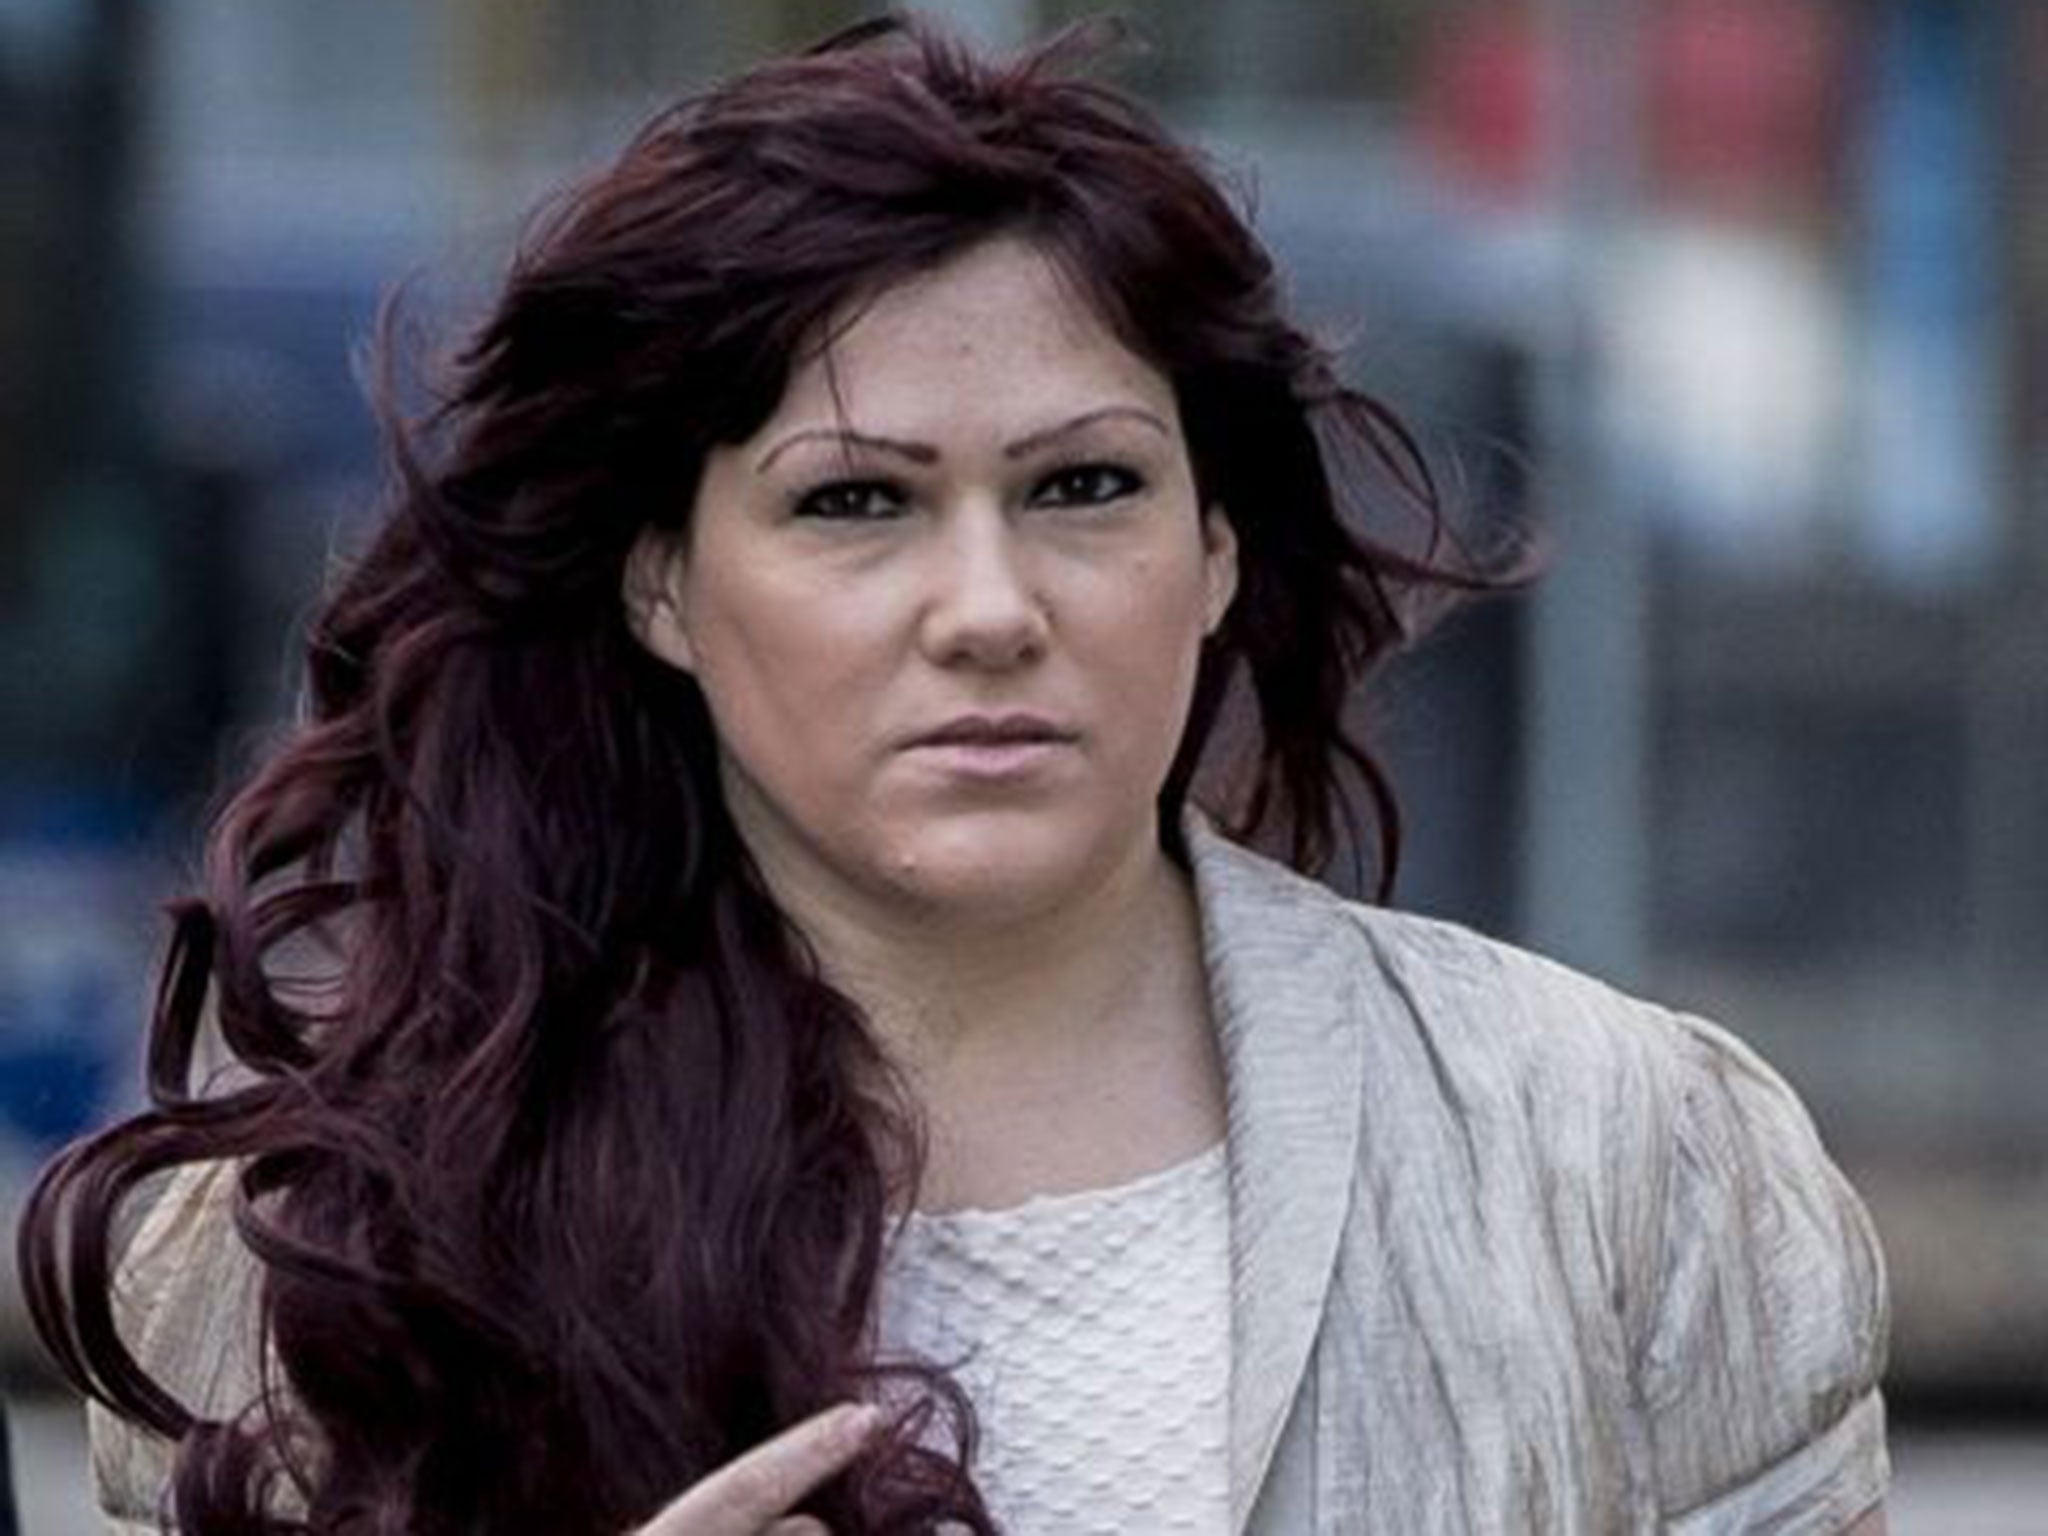 Joanne Mjadzelics arriving at Cardiff Crown Court on 6 January